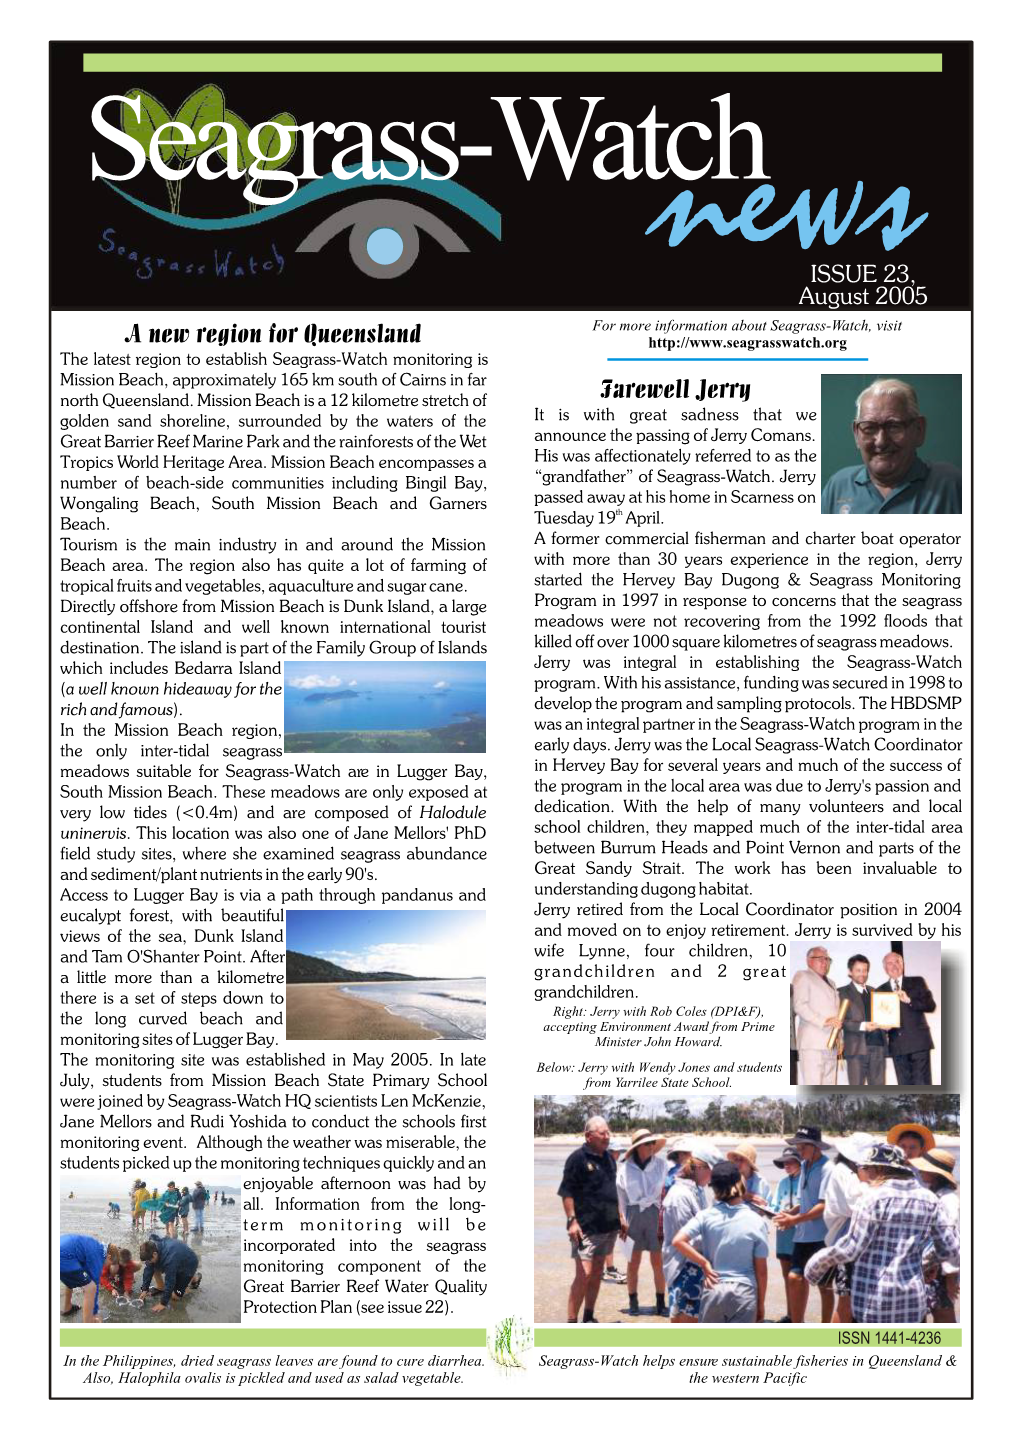 SW Newsletter Issue23 Aug2005.Cdr